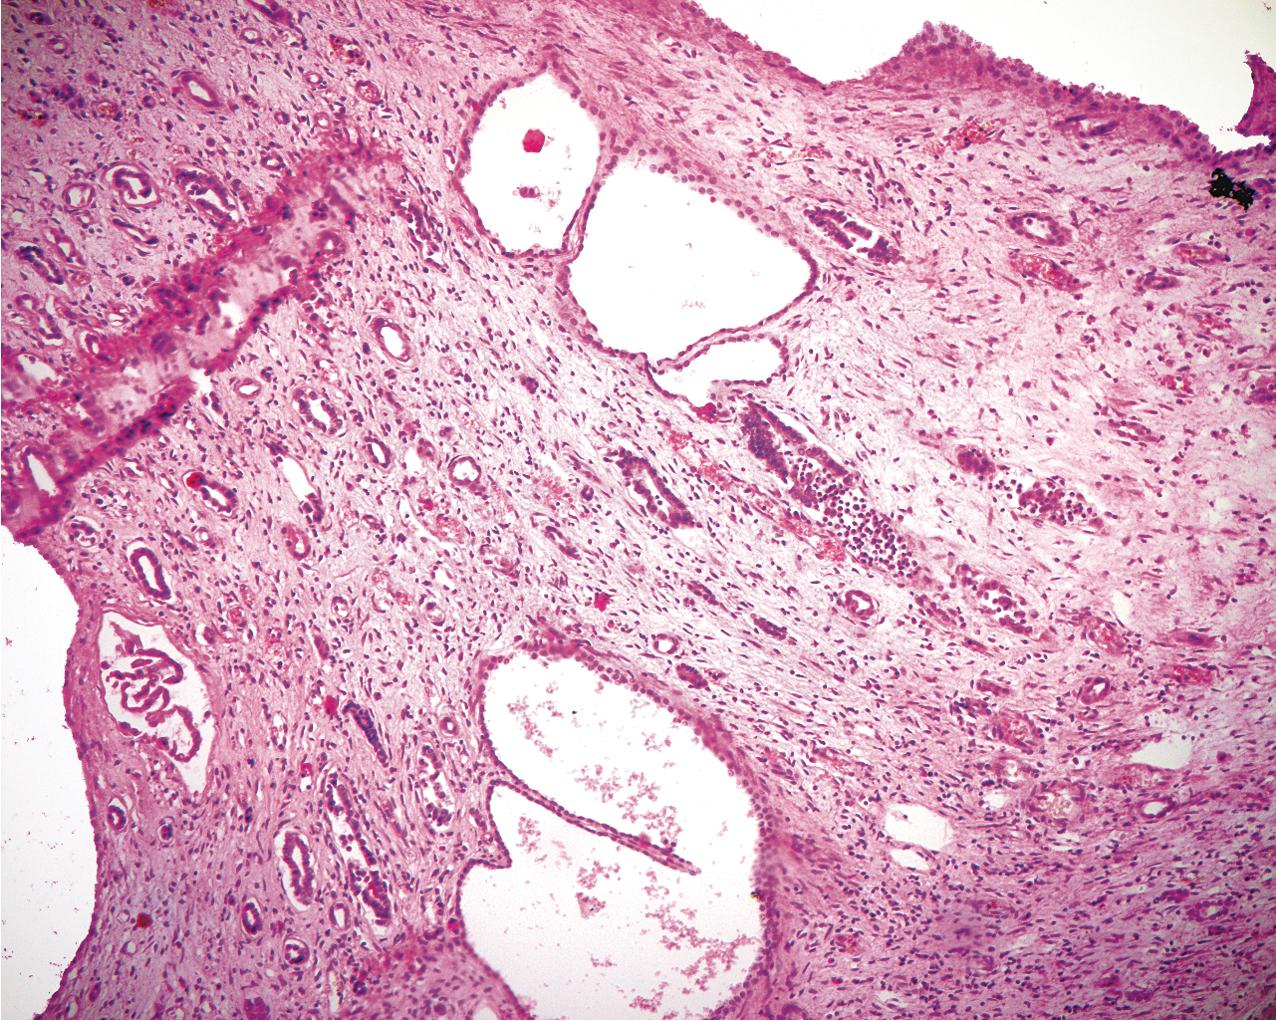 FIG. 9.9, Autosomal dominant polycystic kidney disease. Cysts involve both cortex and medulla and are seen extending into the inner medullary region (hematoxylin and eosin, ×200).